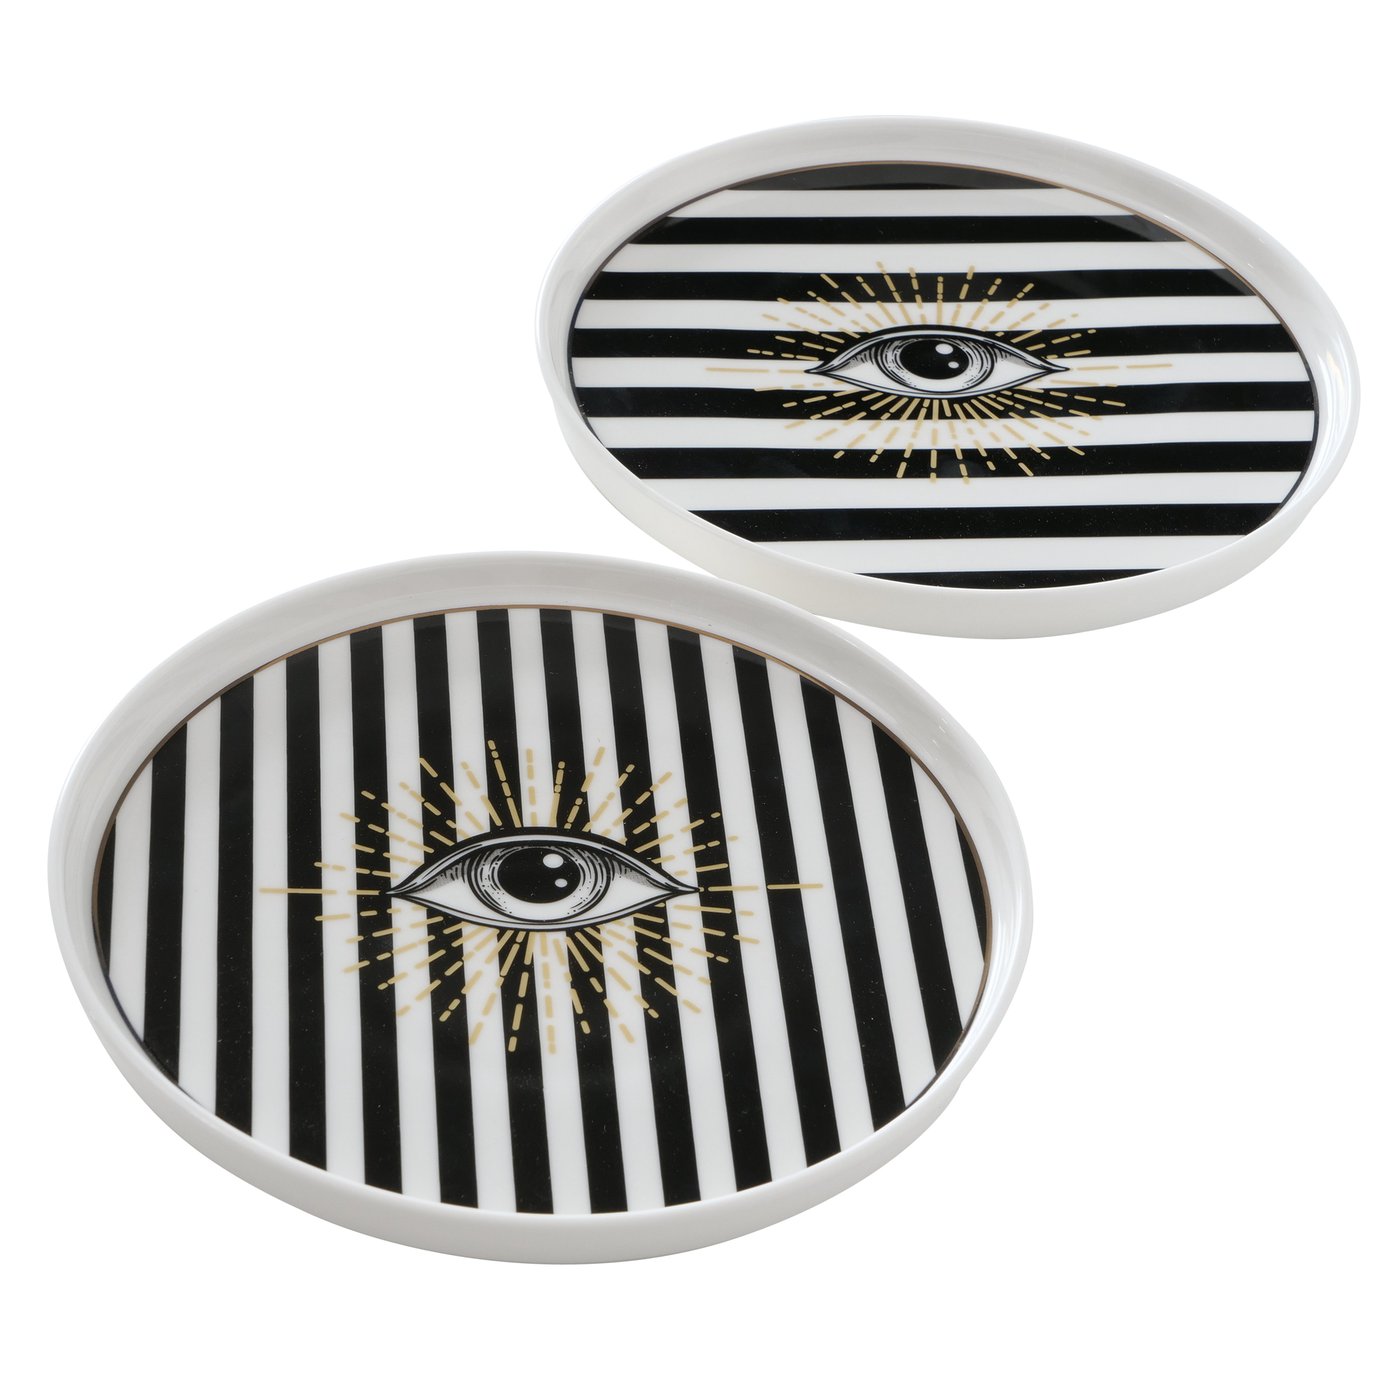 &Quirky Magic Eye Striped Tray Dish : Vertical or Horizontal